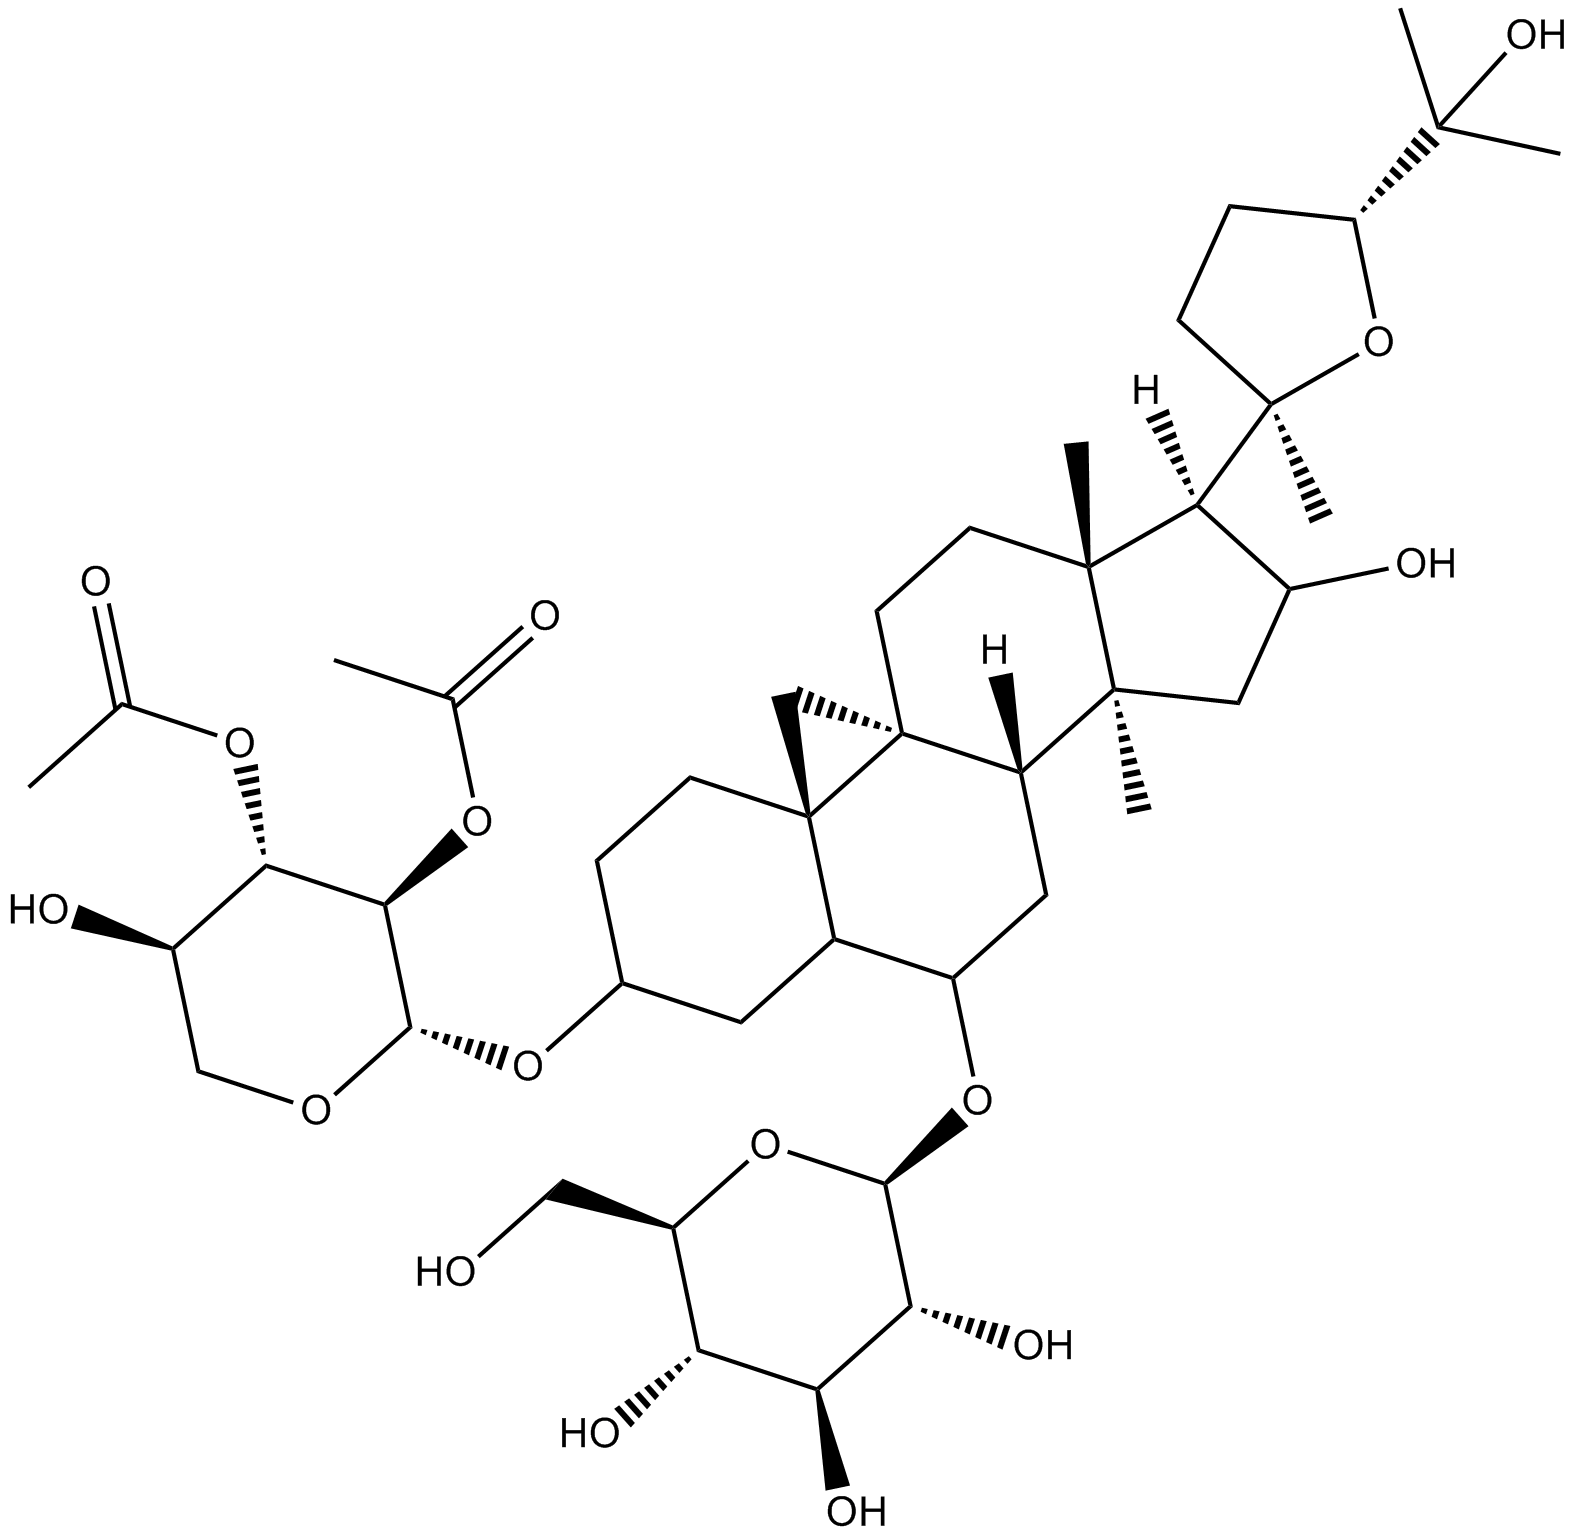 Astragaloside I  Chemical Structure